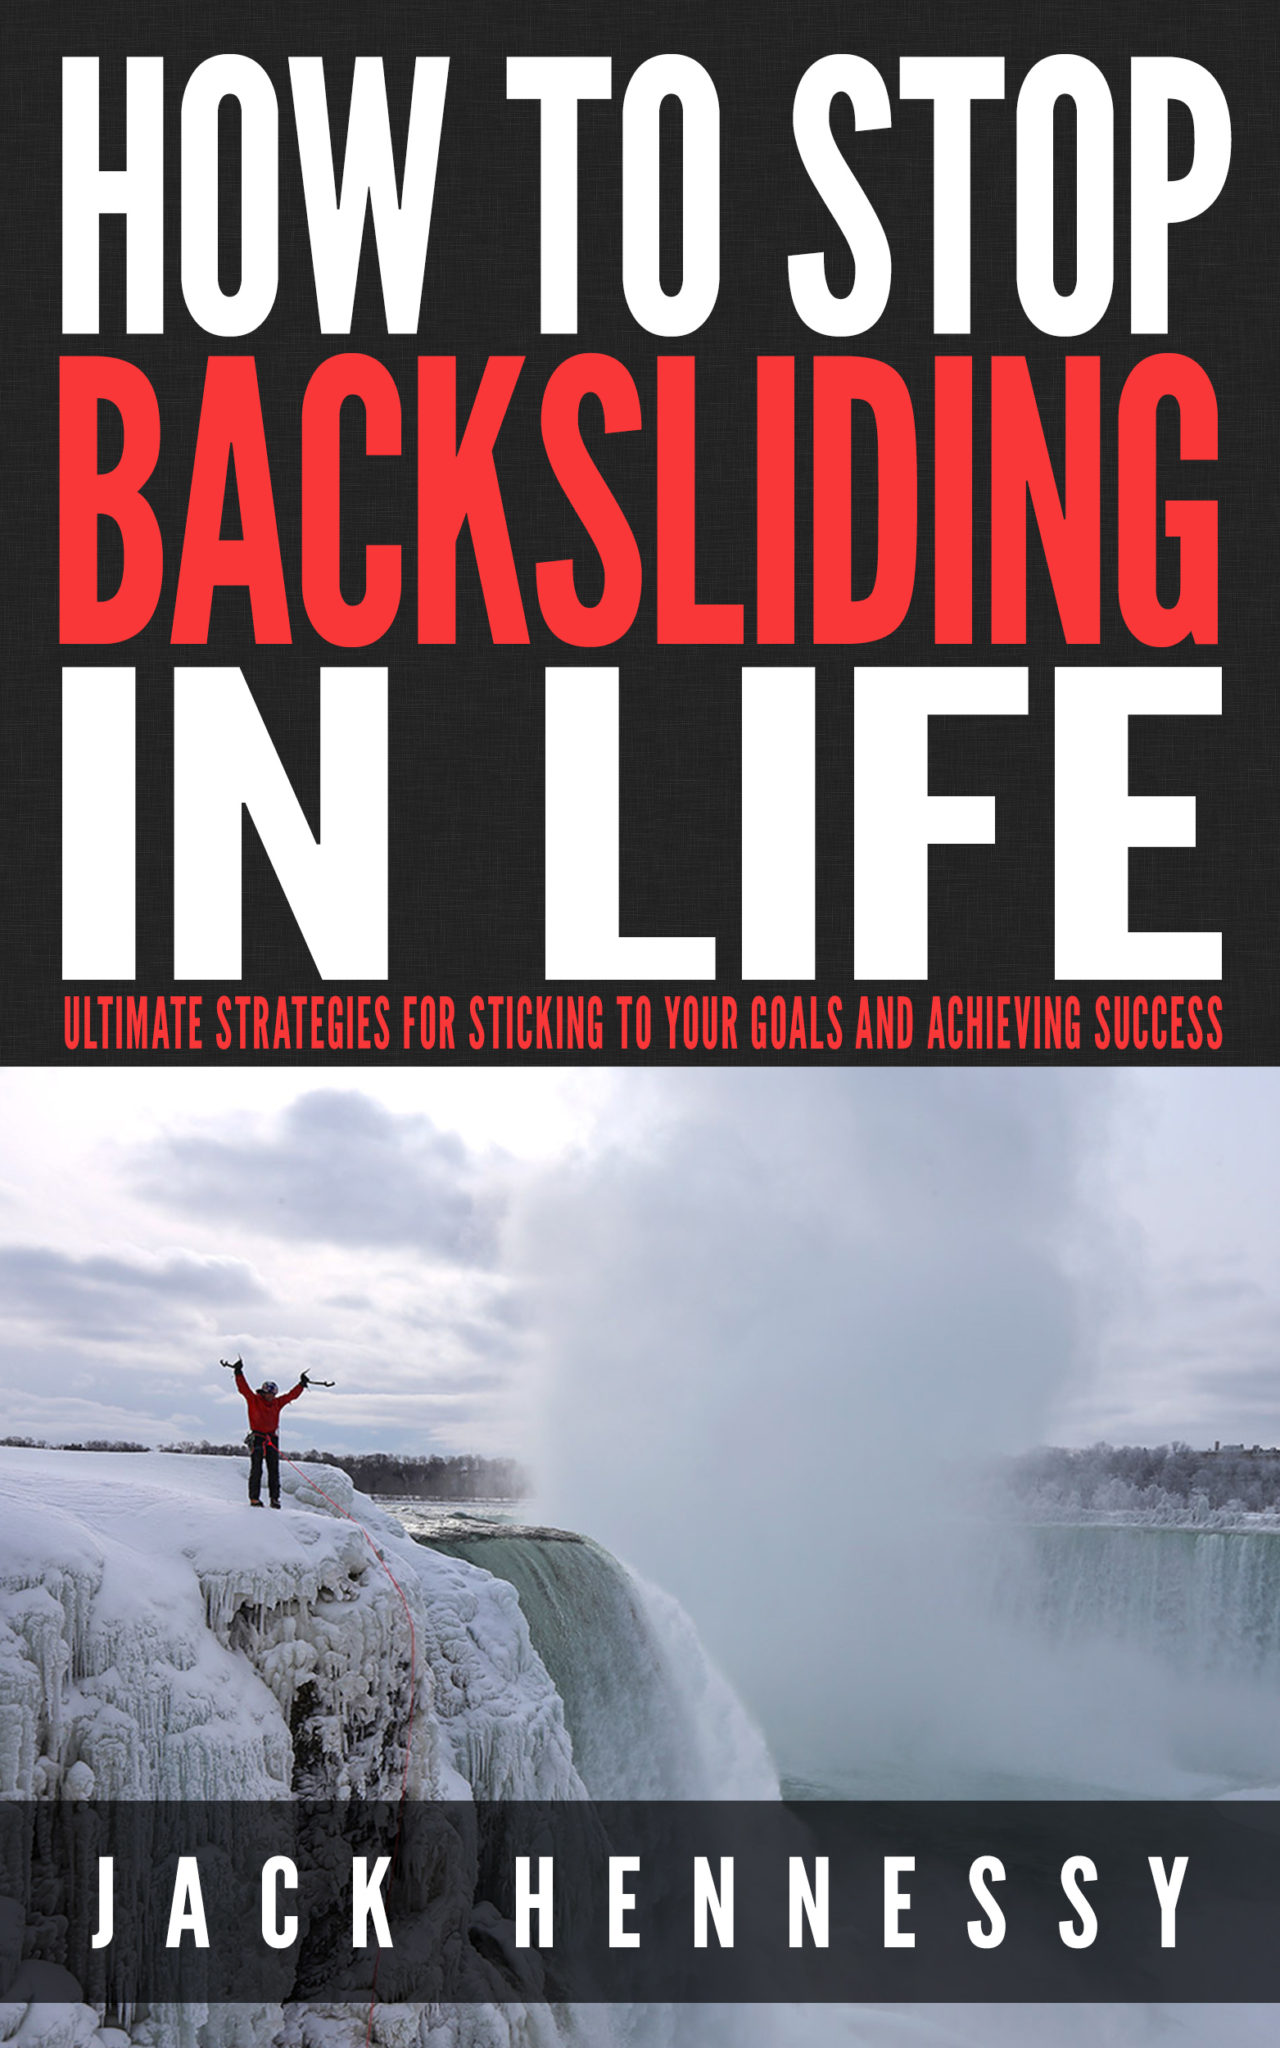 FREE: How To Stop Backsliding In Life: Ultimate Strategies For Sticking To Your Goals And Achieving Success by Jack Hennessy